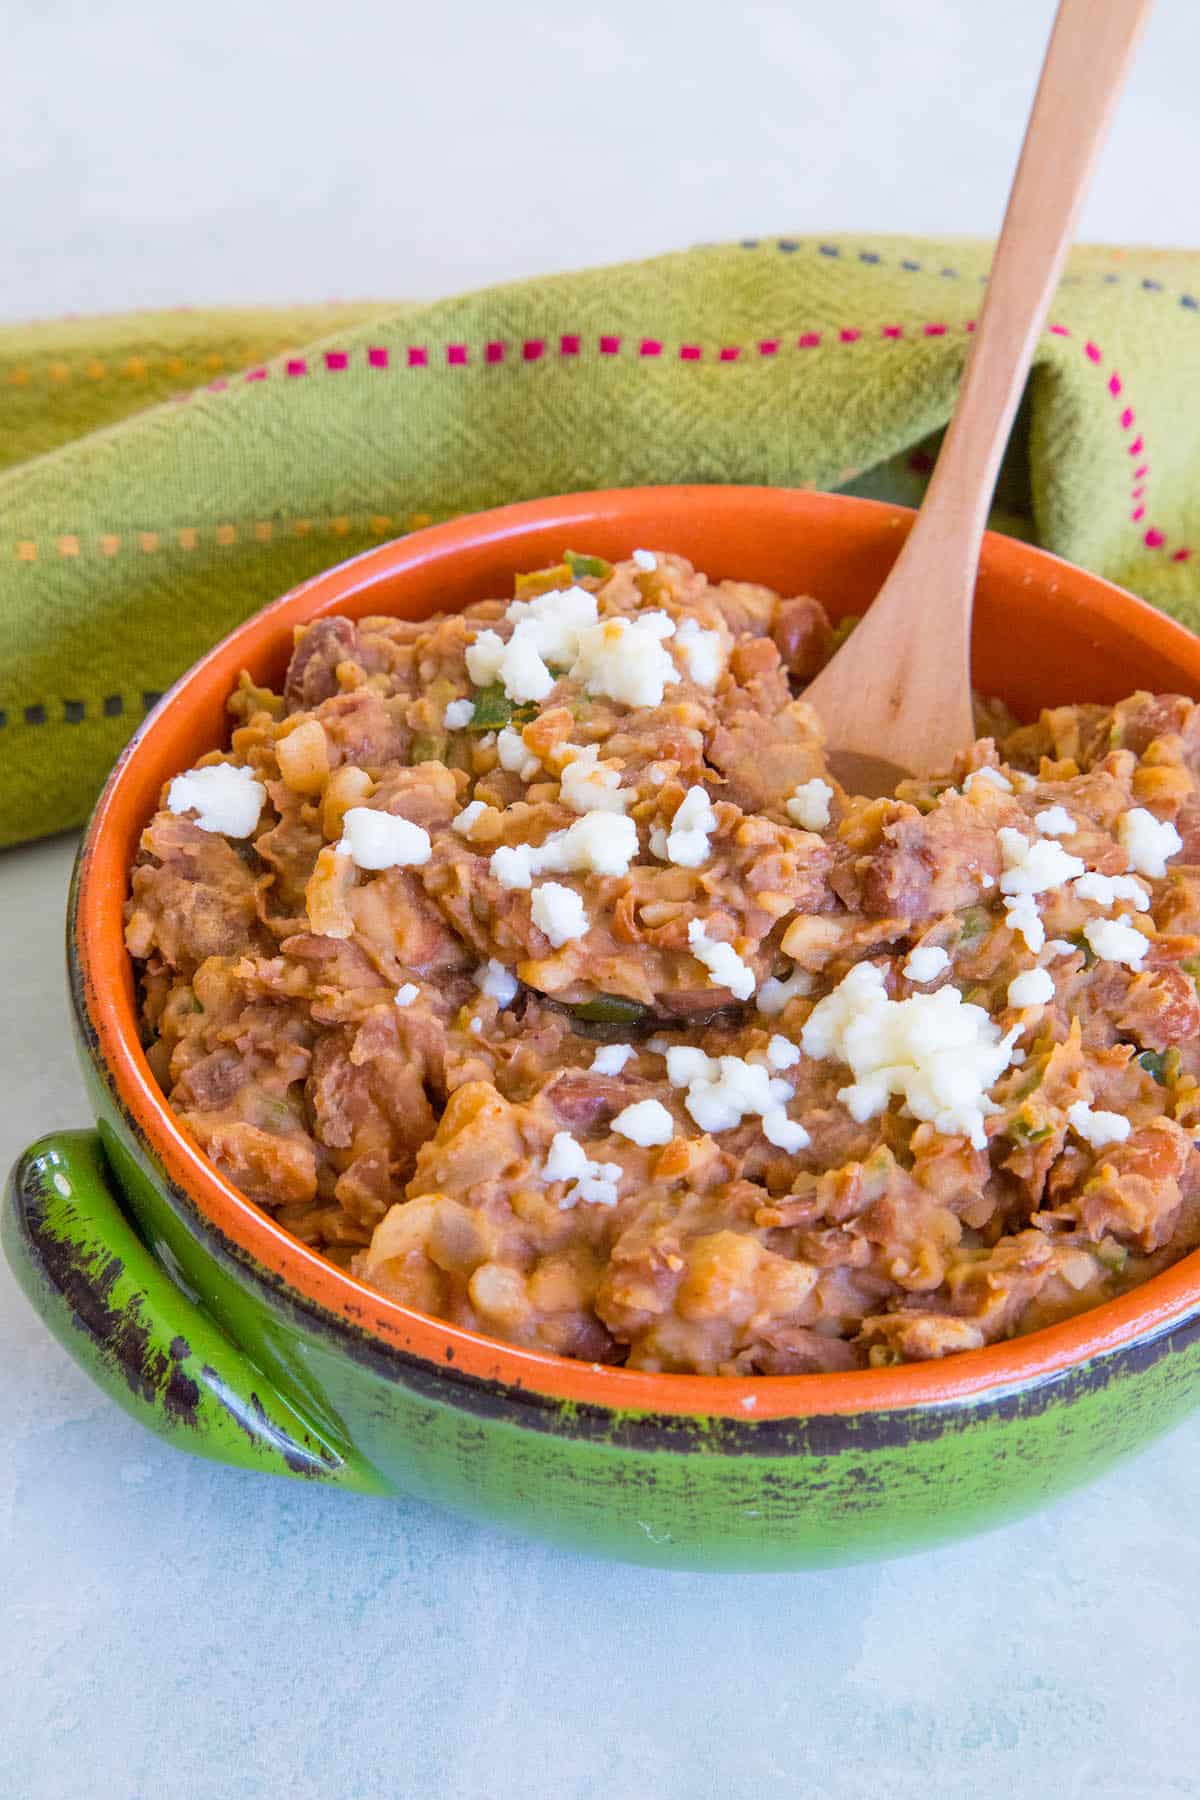 Easy Homemade Refried Beans in a bowl